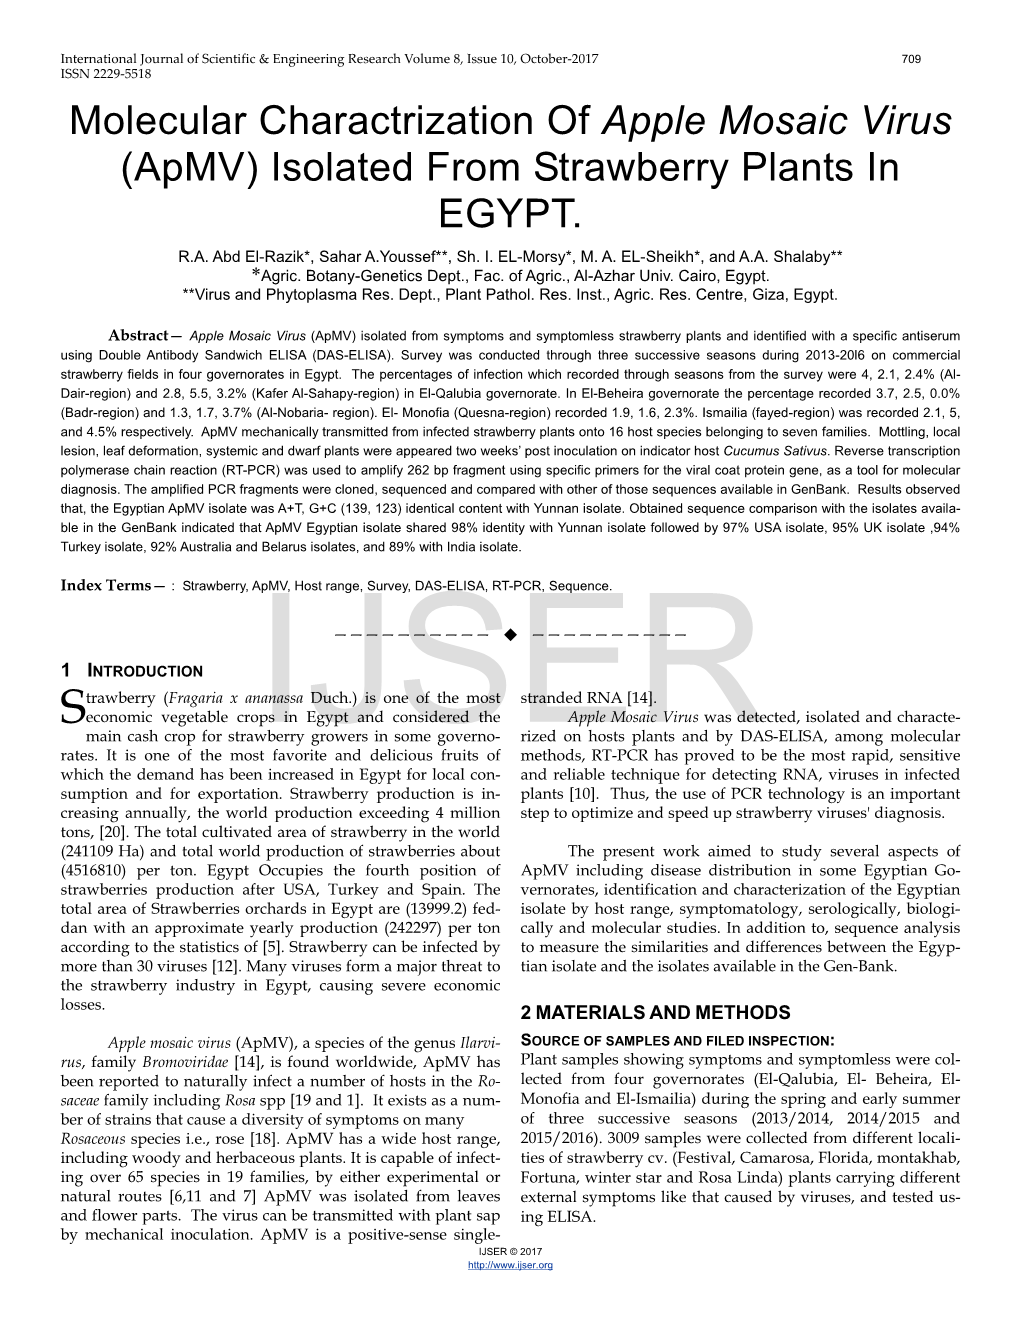 Molecular Charactrization of Apple Mosaic Virus (Apmv) Isolated from Strawberry Plants in EGYPT